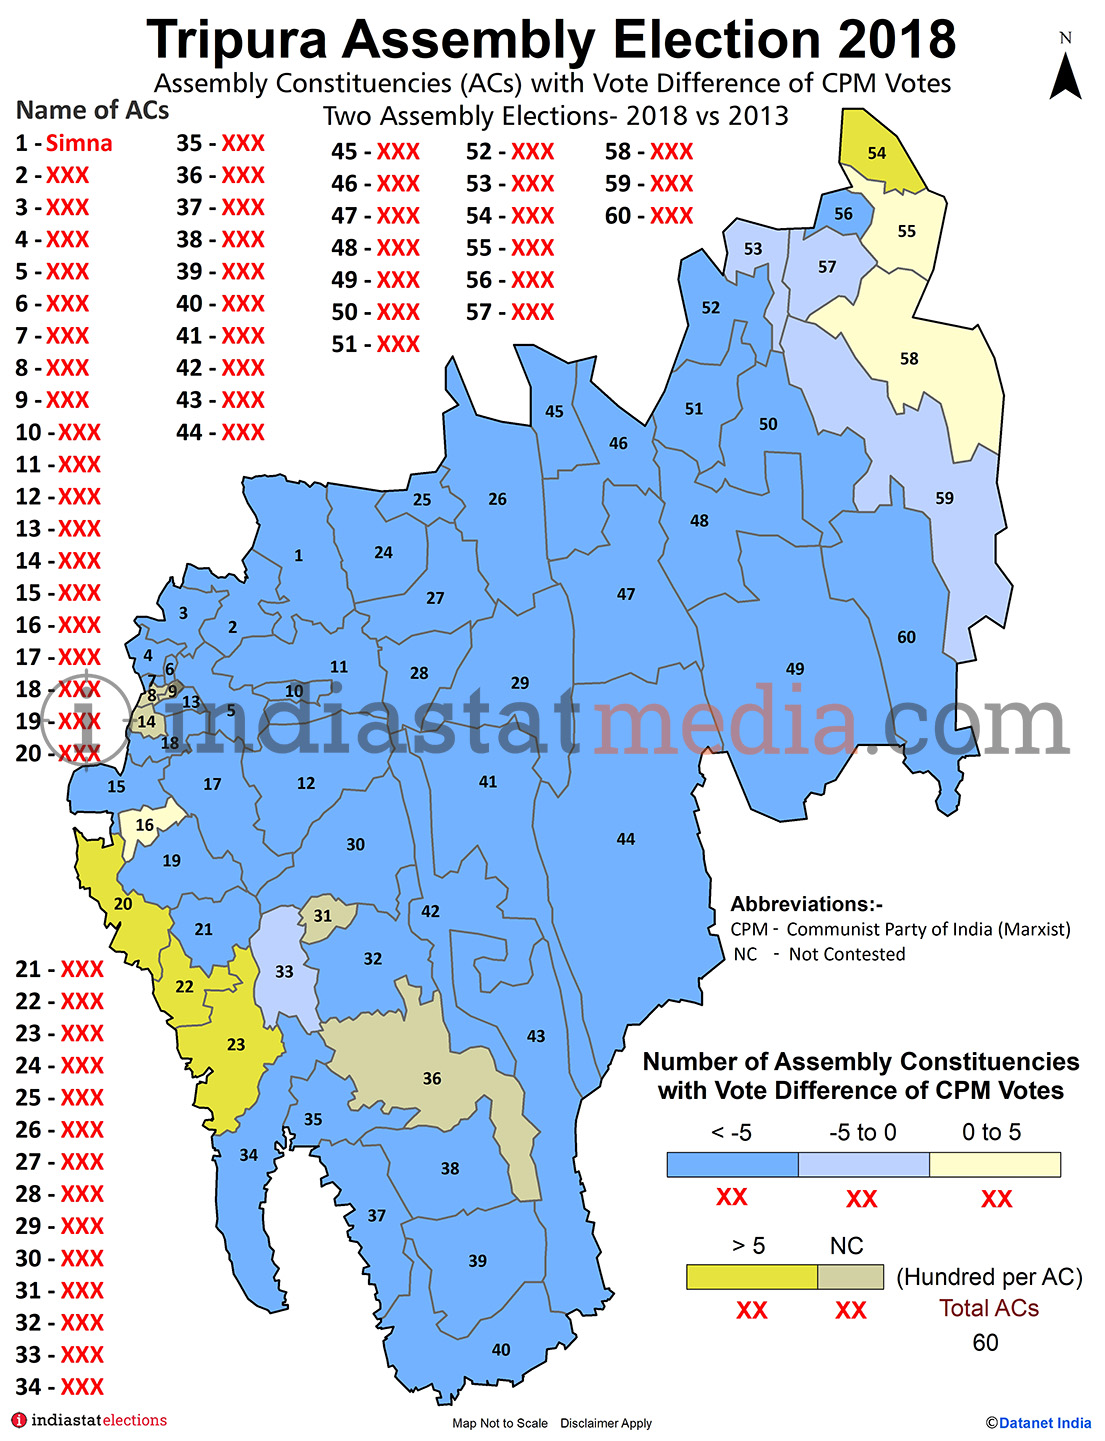 Assembly Constituencies with Vote Difference of CPM Votes in Tripura (Assembly Elections - 2013 & 2018)